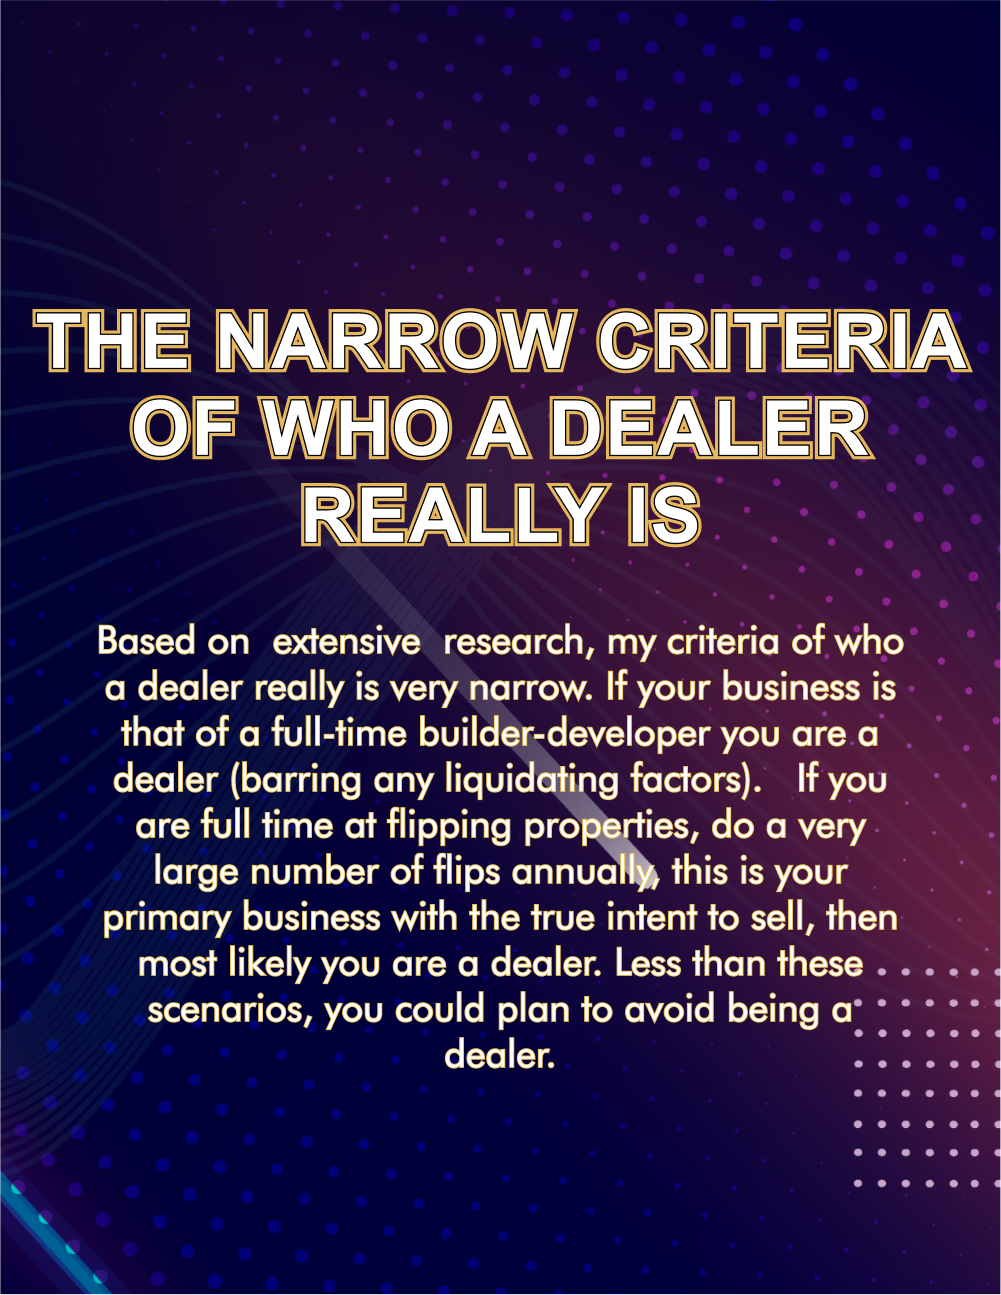 THE NARROW CRITERIA OF WHO A DEALER REALLY IS